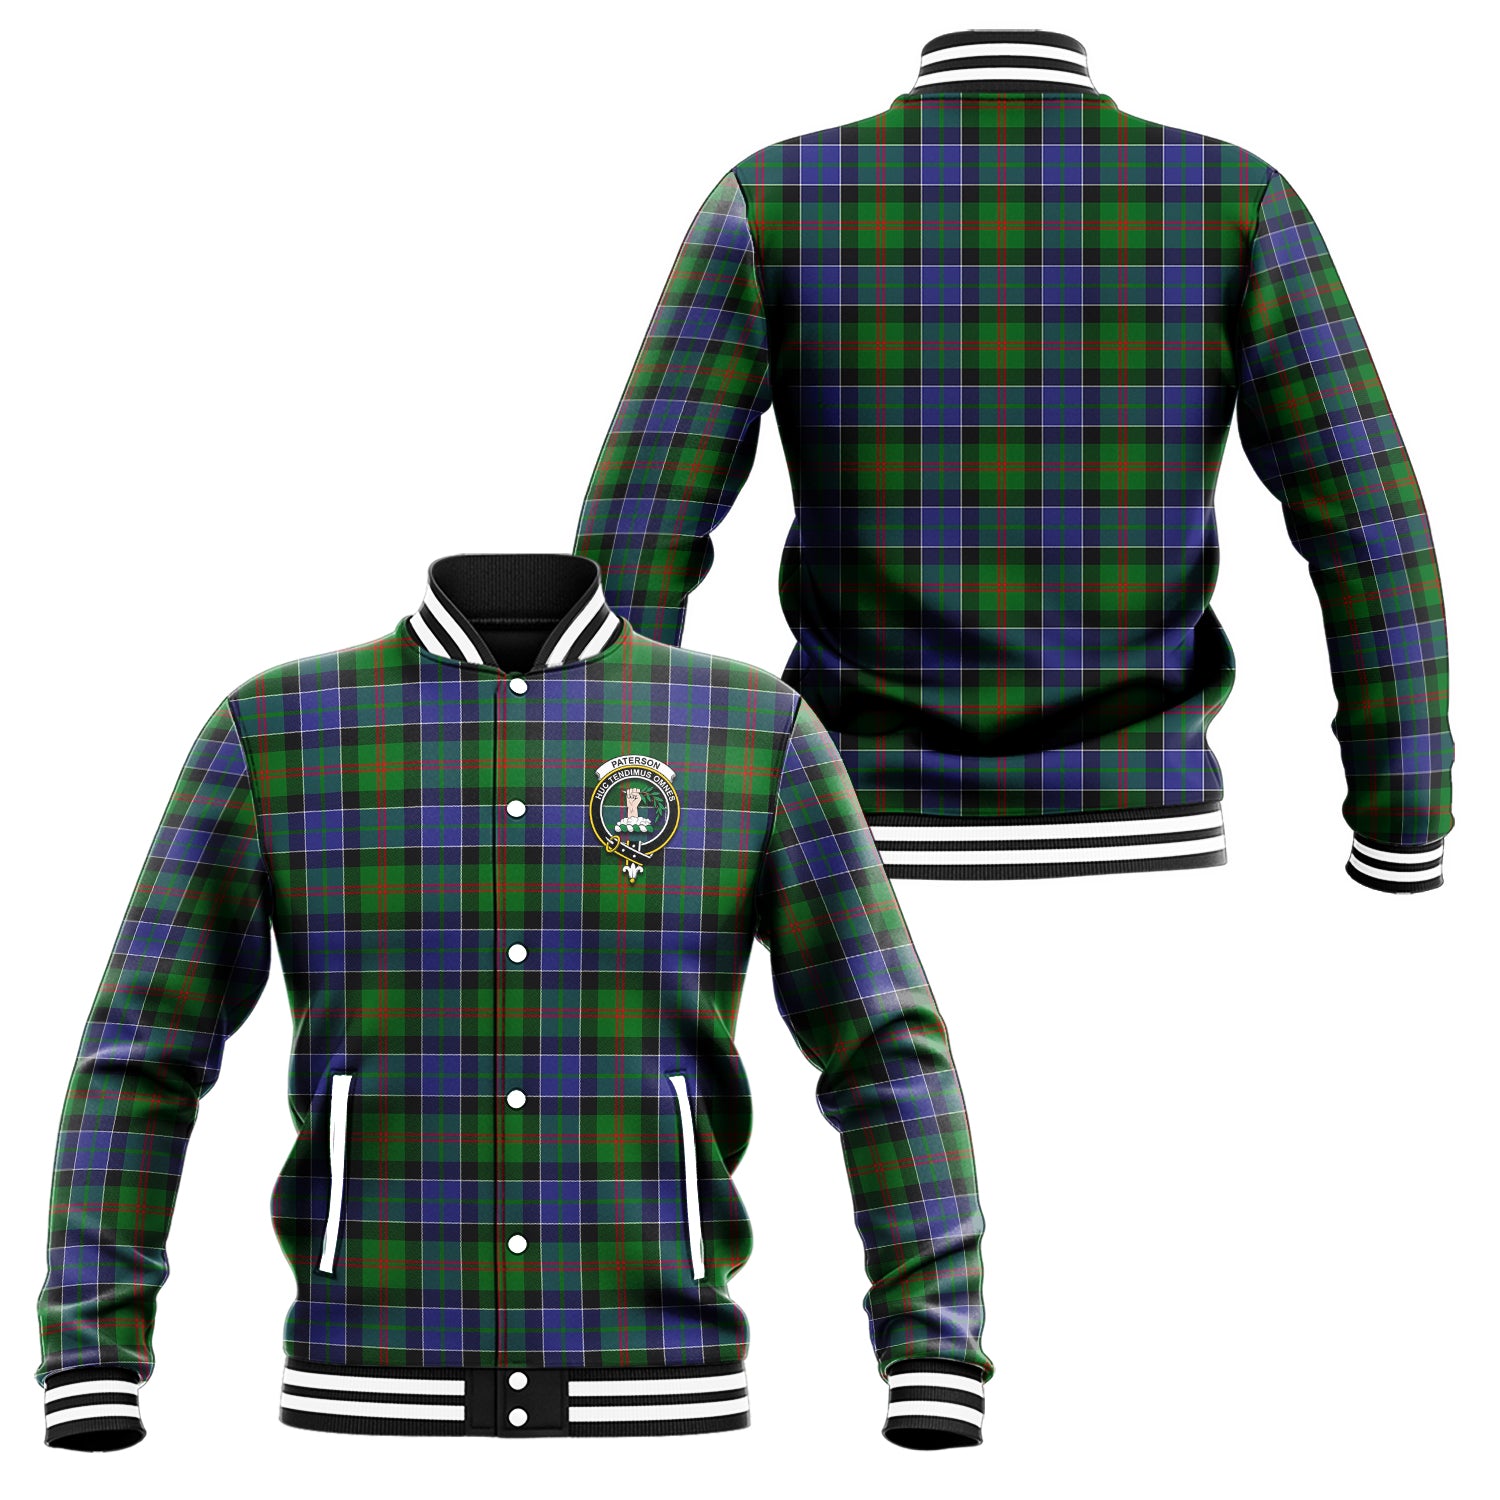 paterson-tartan-baseball-jacket-with-family-crest